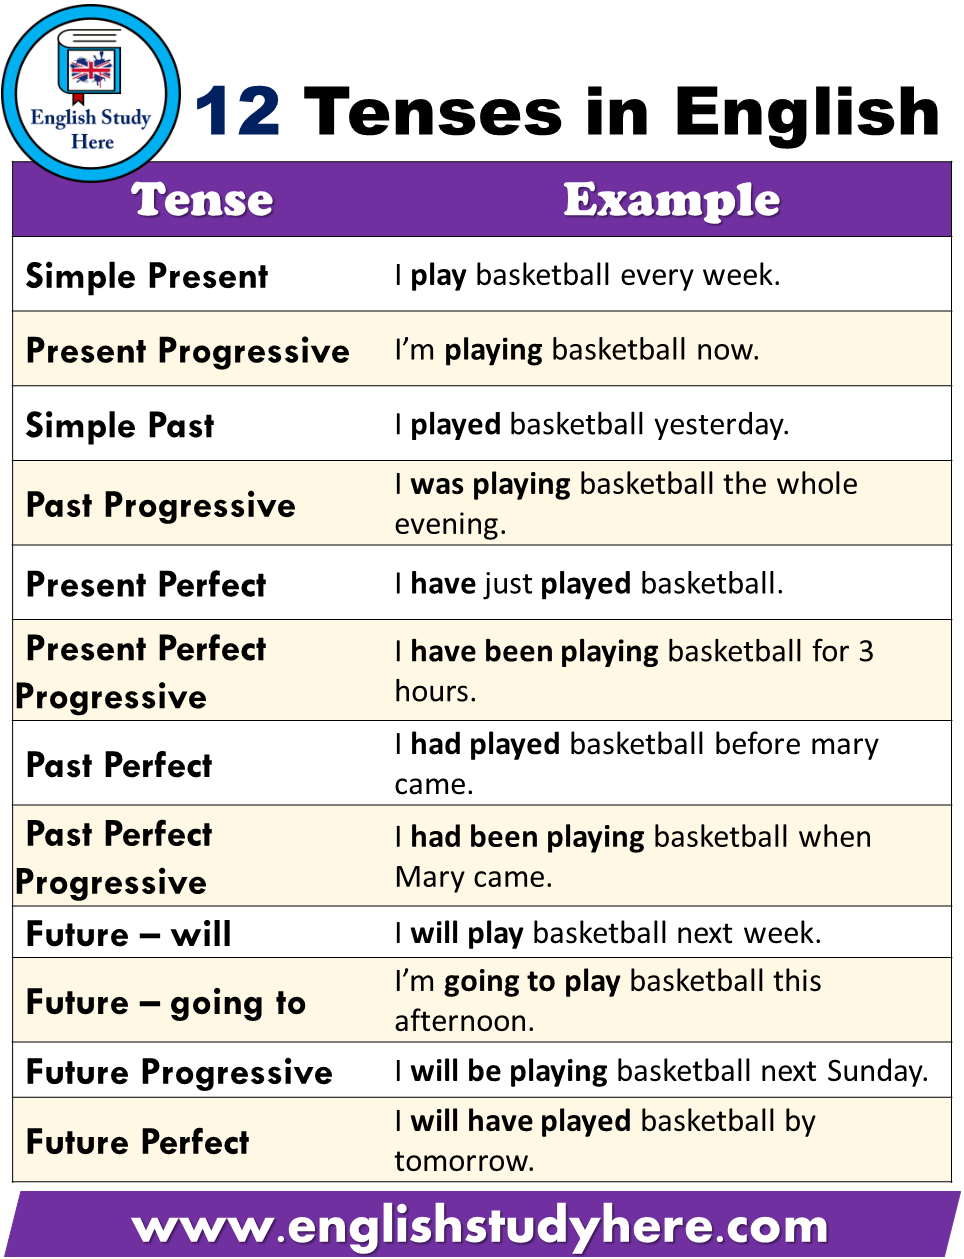 12 Tenses With Examples Pdf - pdfowl